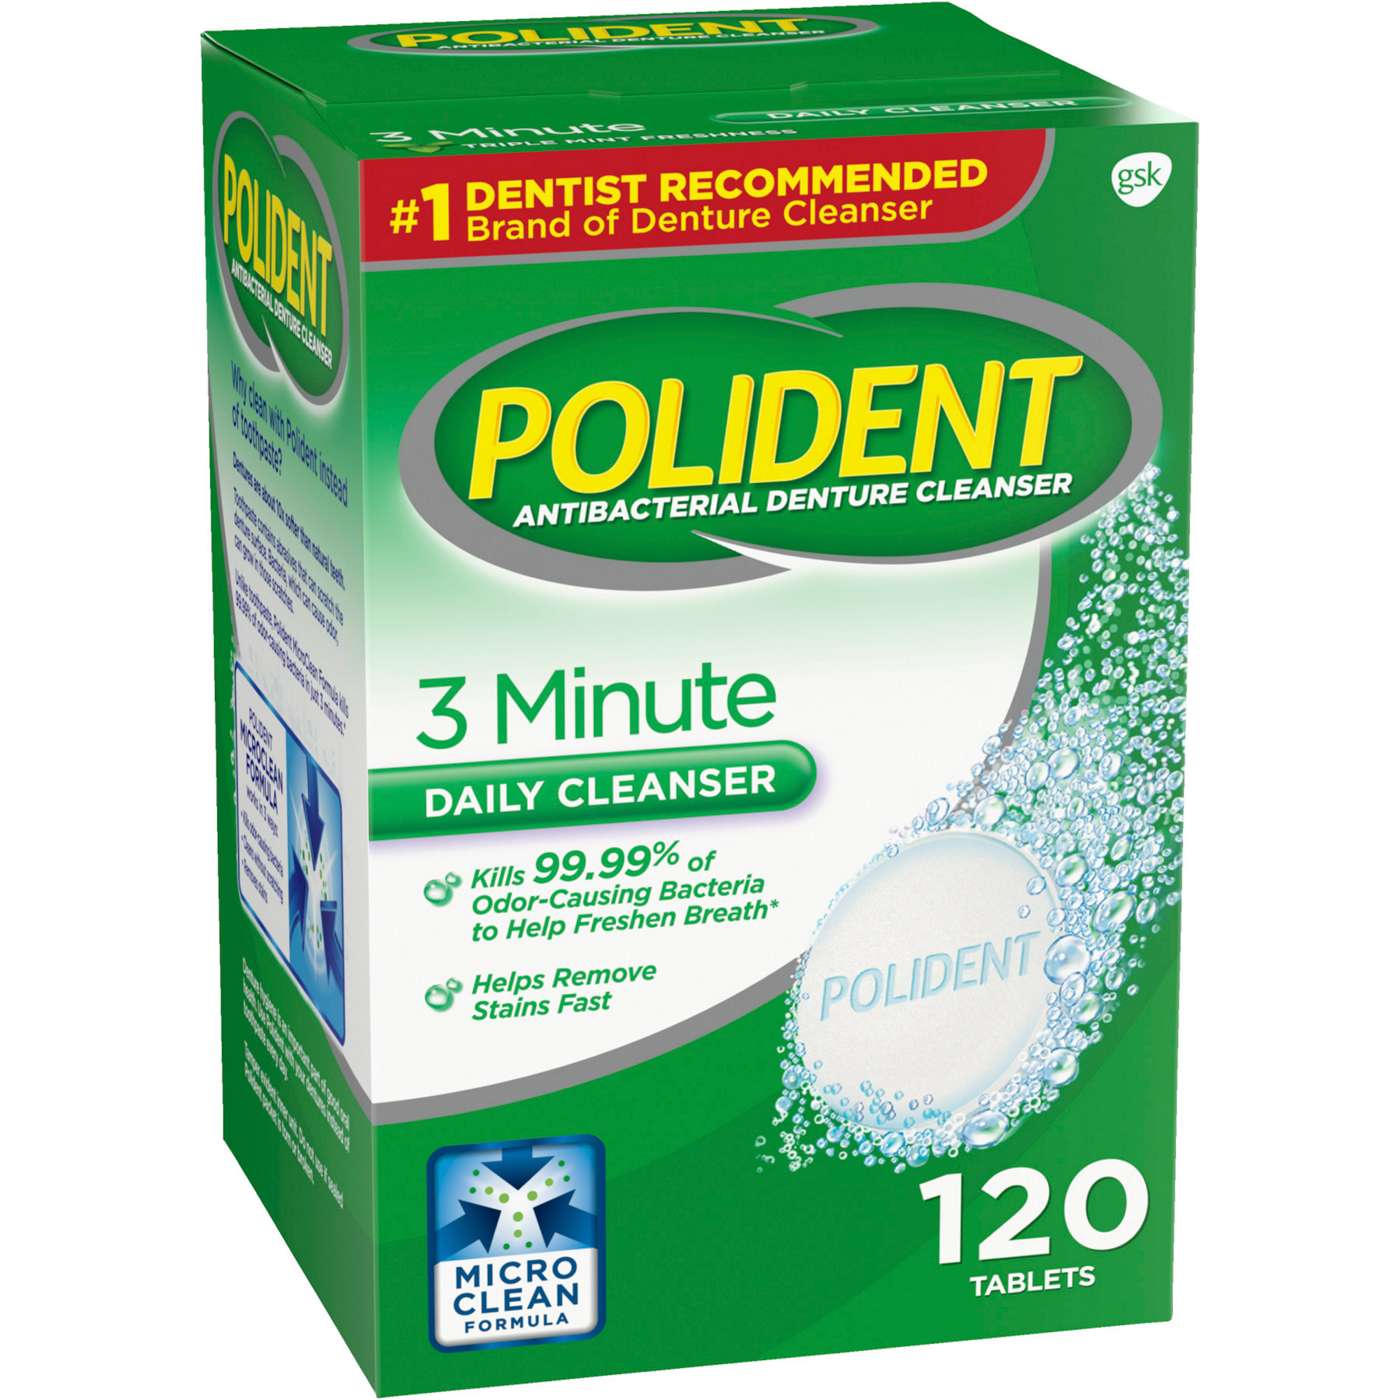 Polident 3 Minute Triple Mint Antibacterial Denture Cleanser Effervescent Tablets; image 1 of 8